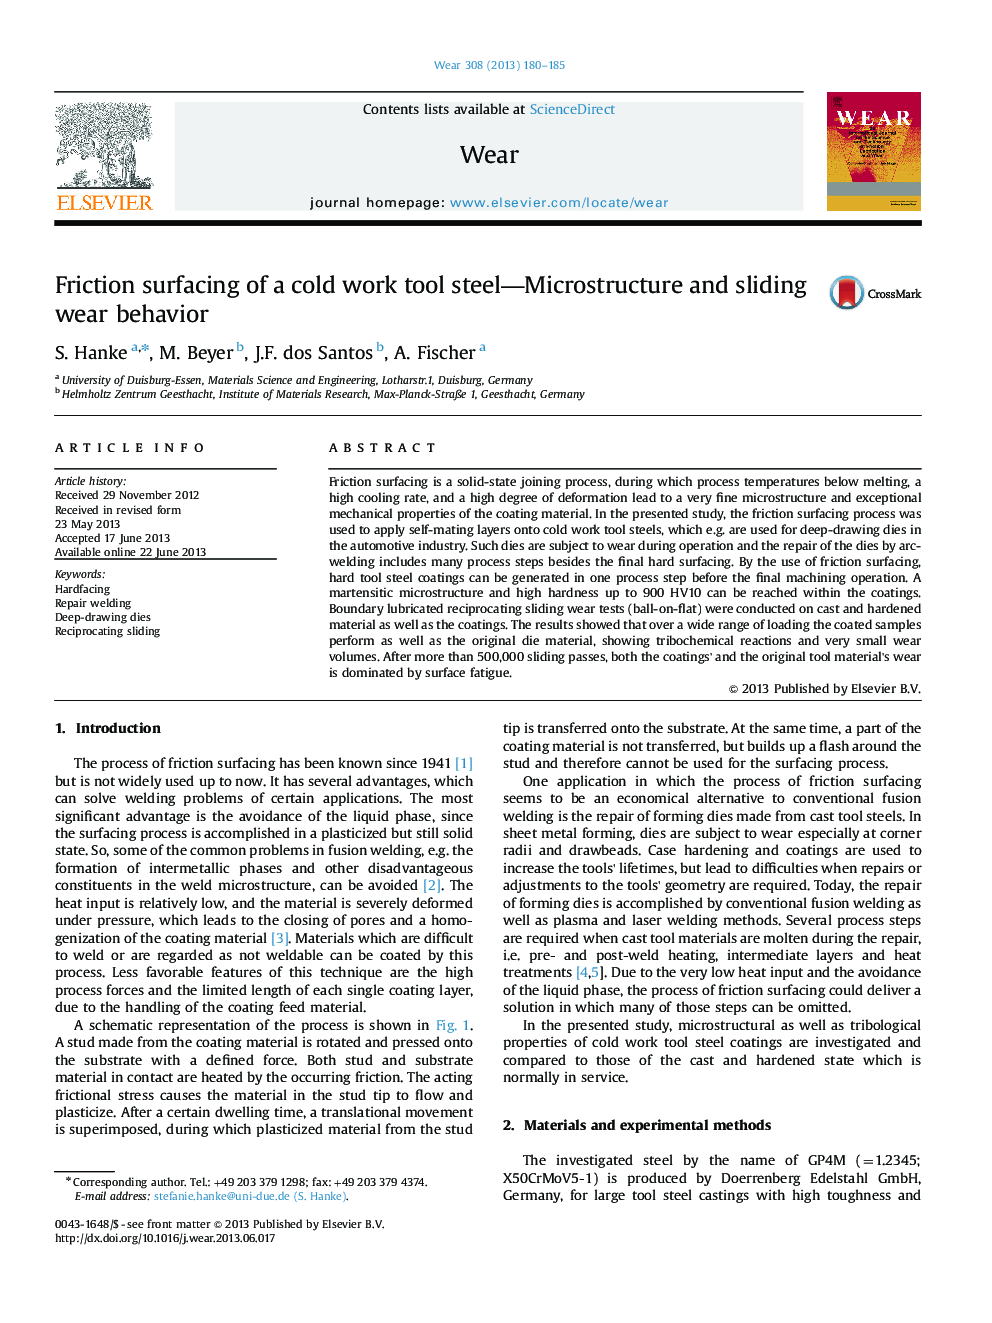 Friction surfacing of a cold work tool steel-Microstructure and sliding wear behavior